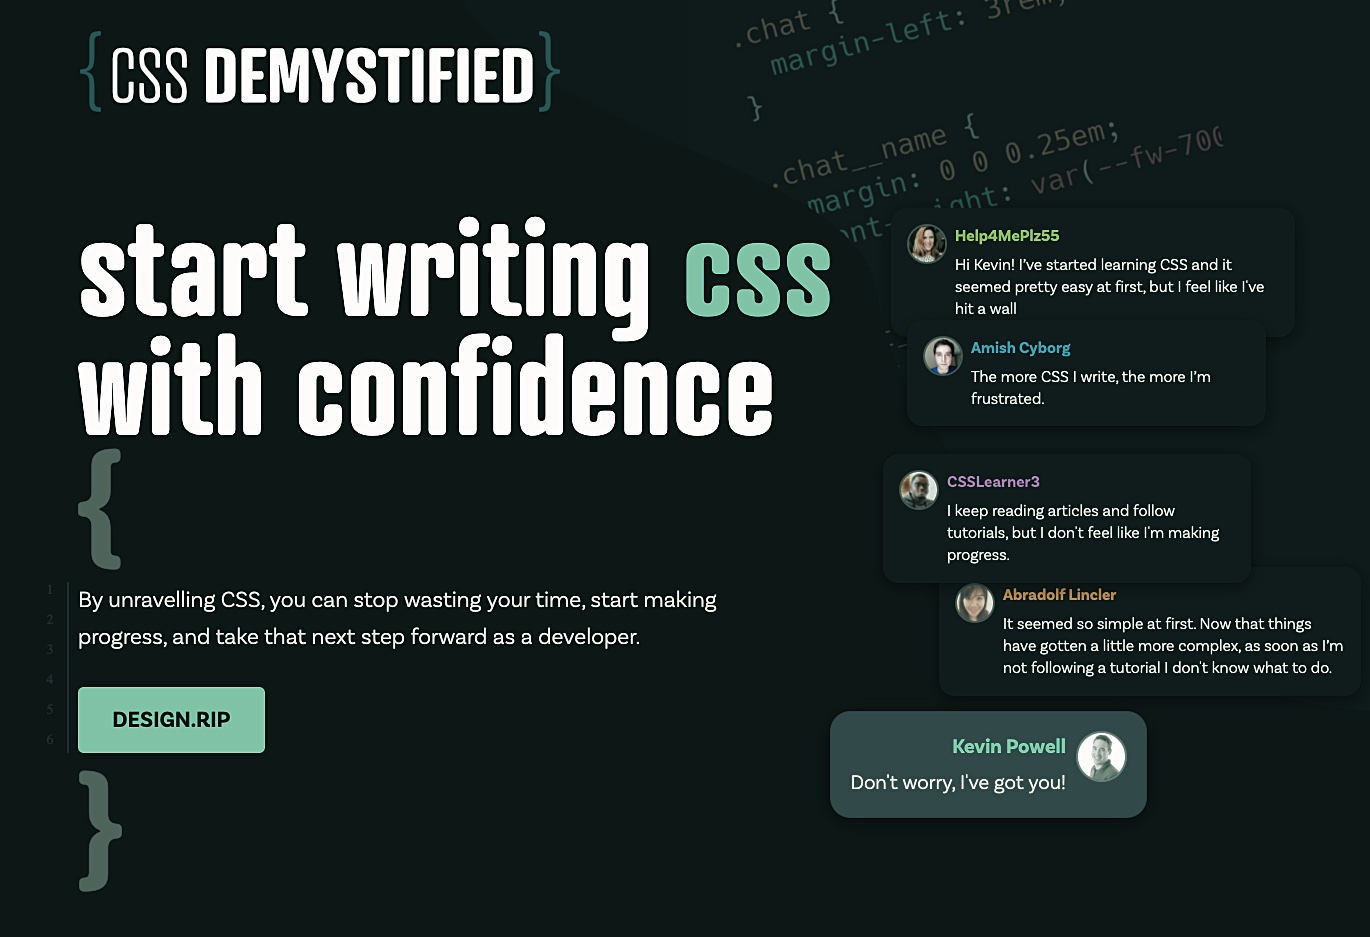 [VIP] Kevin Powell: CSS Demystified: Start writing CSS with confidence